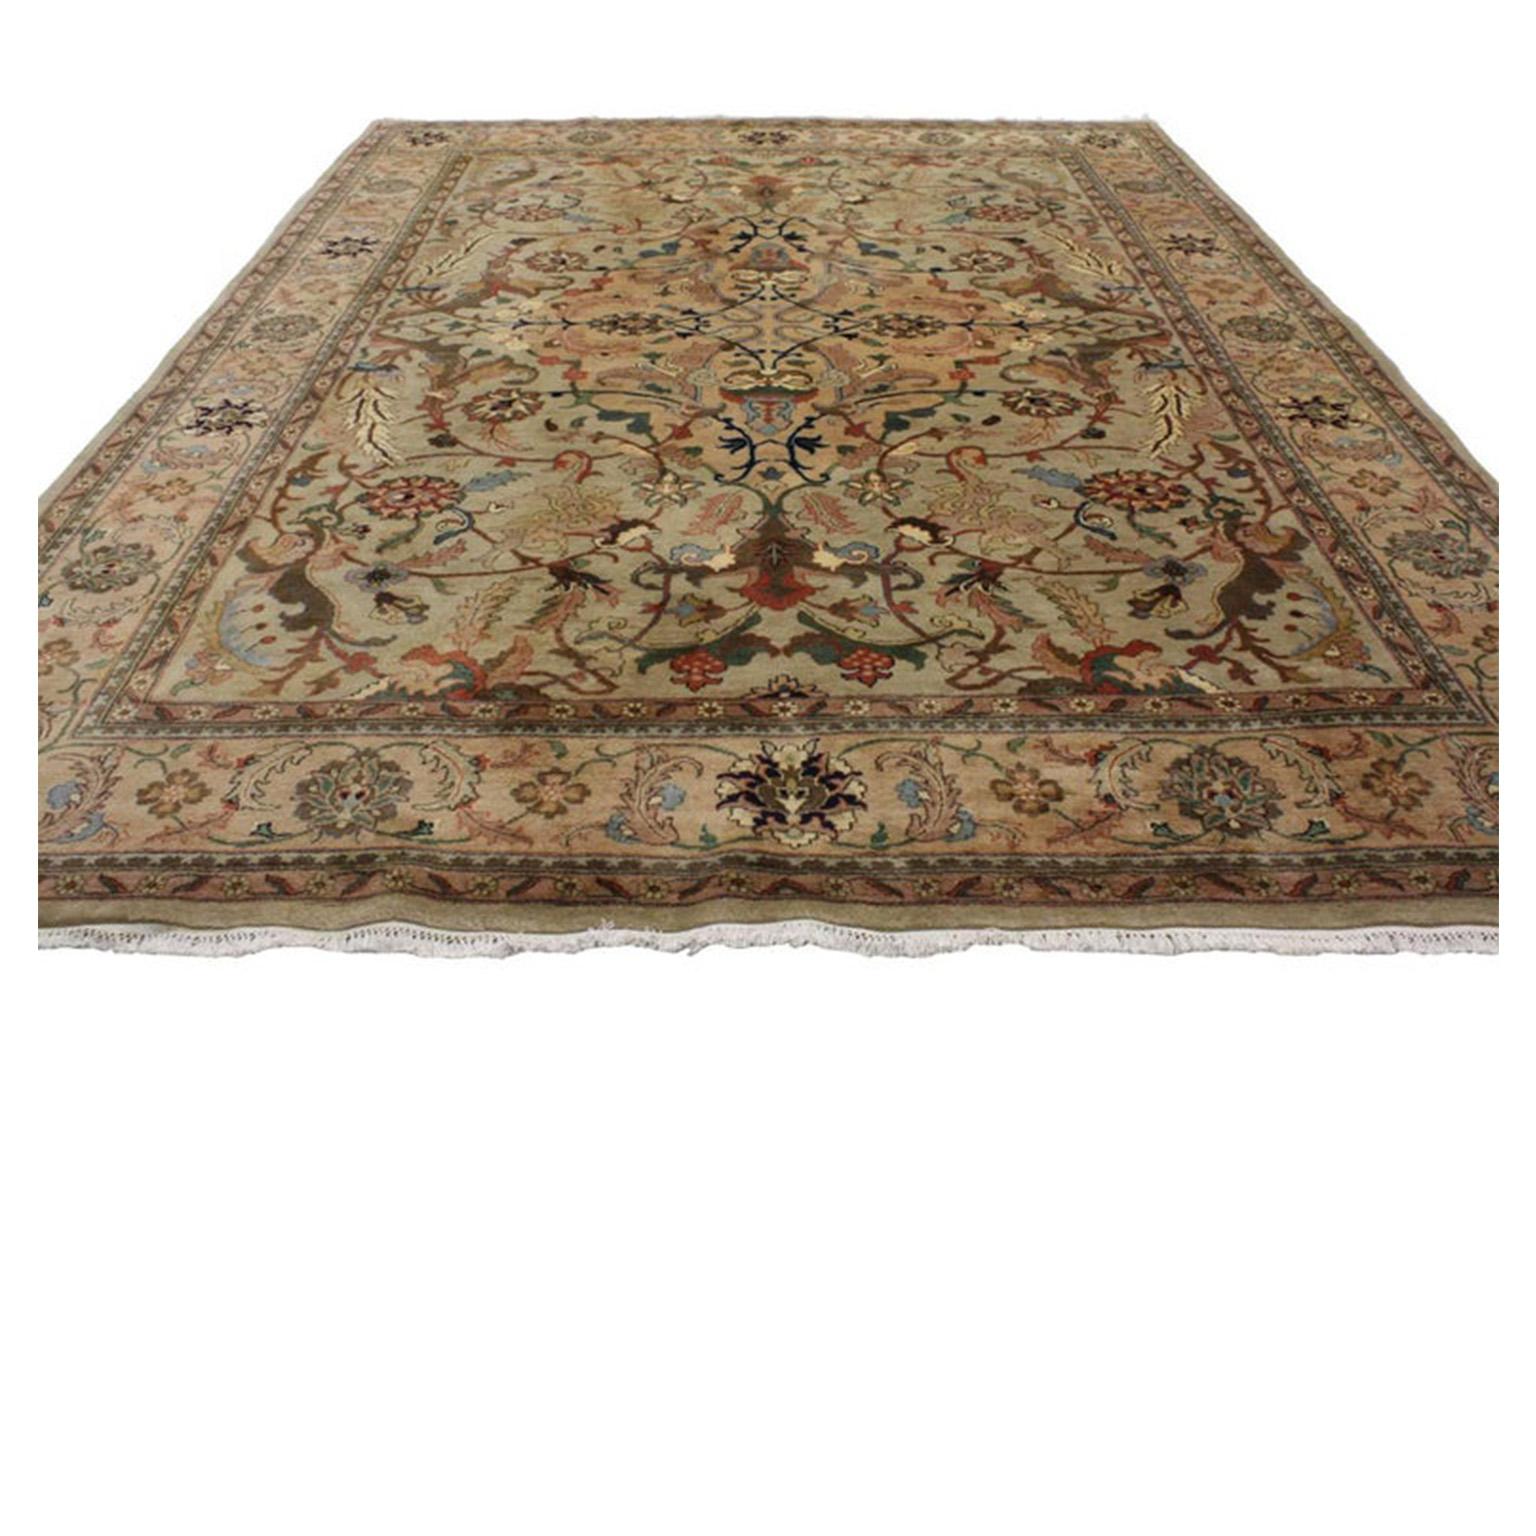 A beautiful vintage traditional rug with Persian style Herati design. This hand knotted wool vintage Persian Herati style rug features traditional designs with floral and foliage forms and a decorative border. Perfect for a dining room, living room